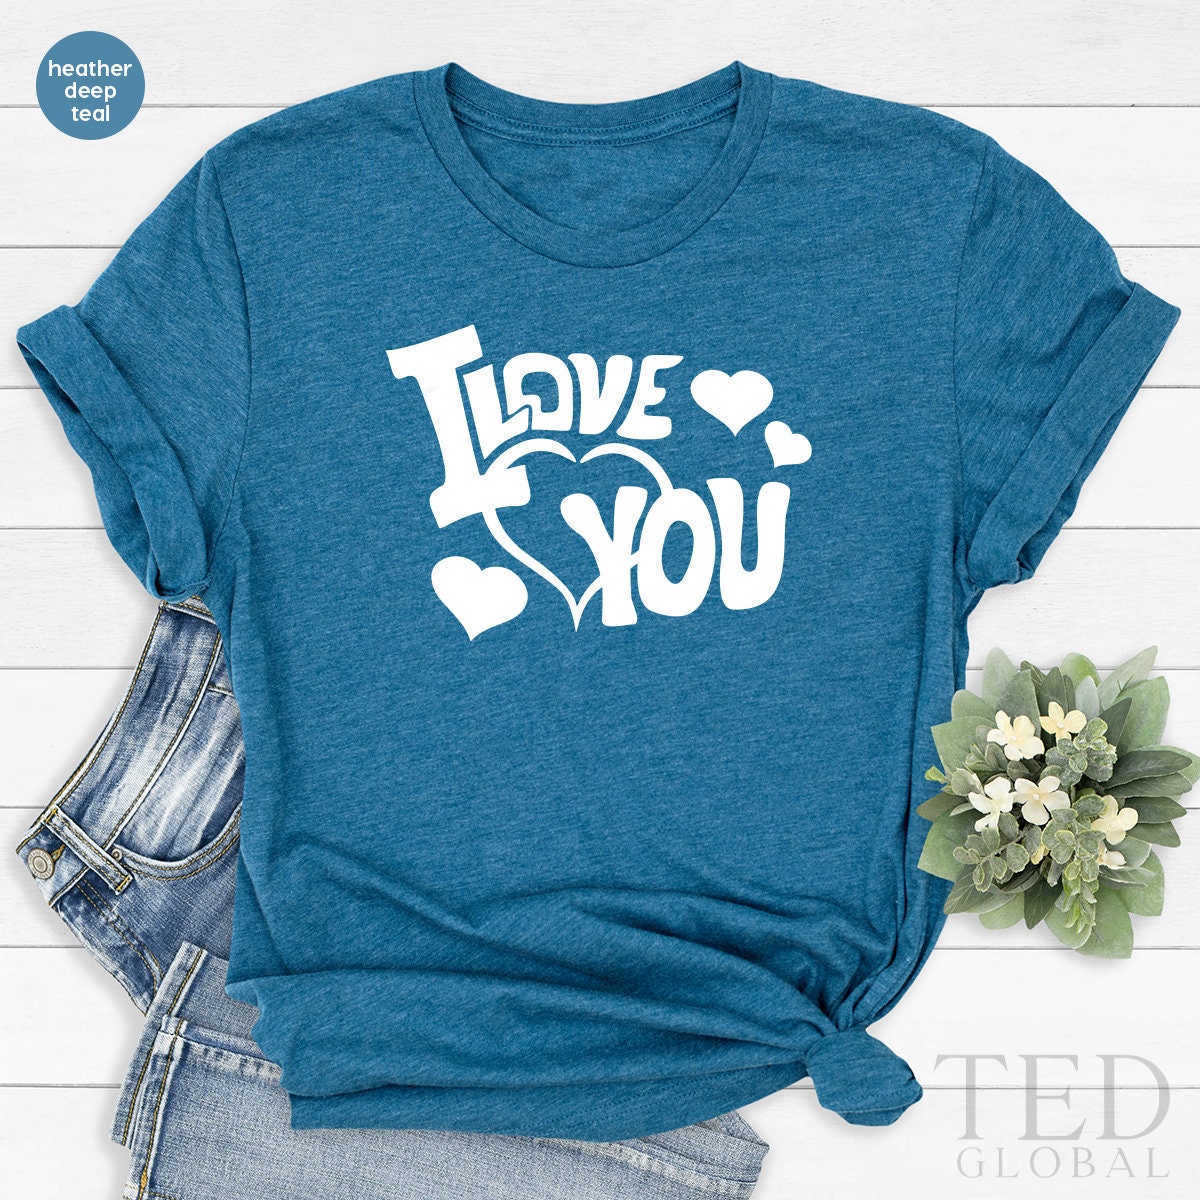 Personalized Couple Shirts, Girlfriend Shirt, I Love You T Shirt, Mothers Day Shirt, Valentines Day TShirt, Shirt For Women - Fastdeliverytees.com